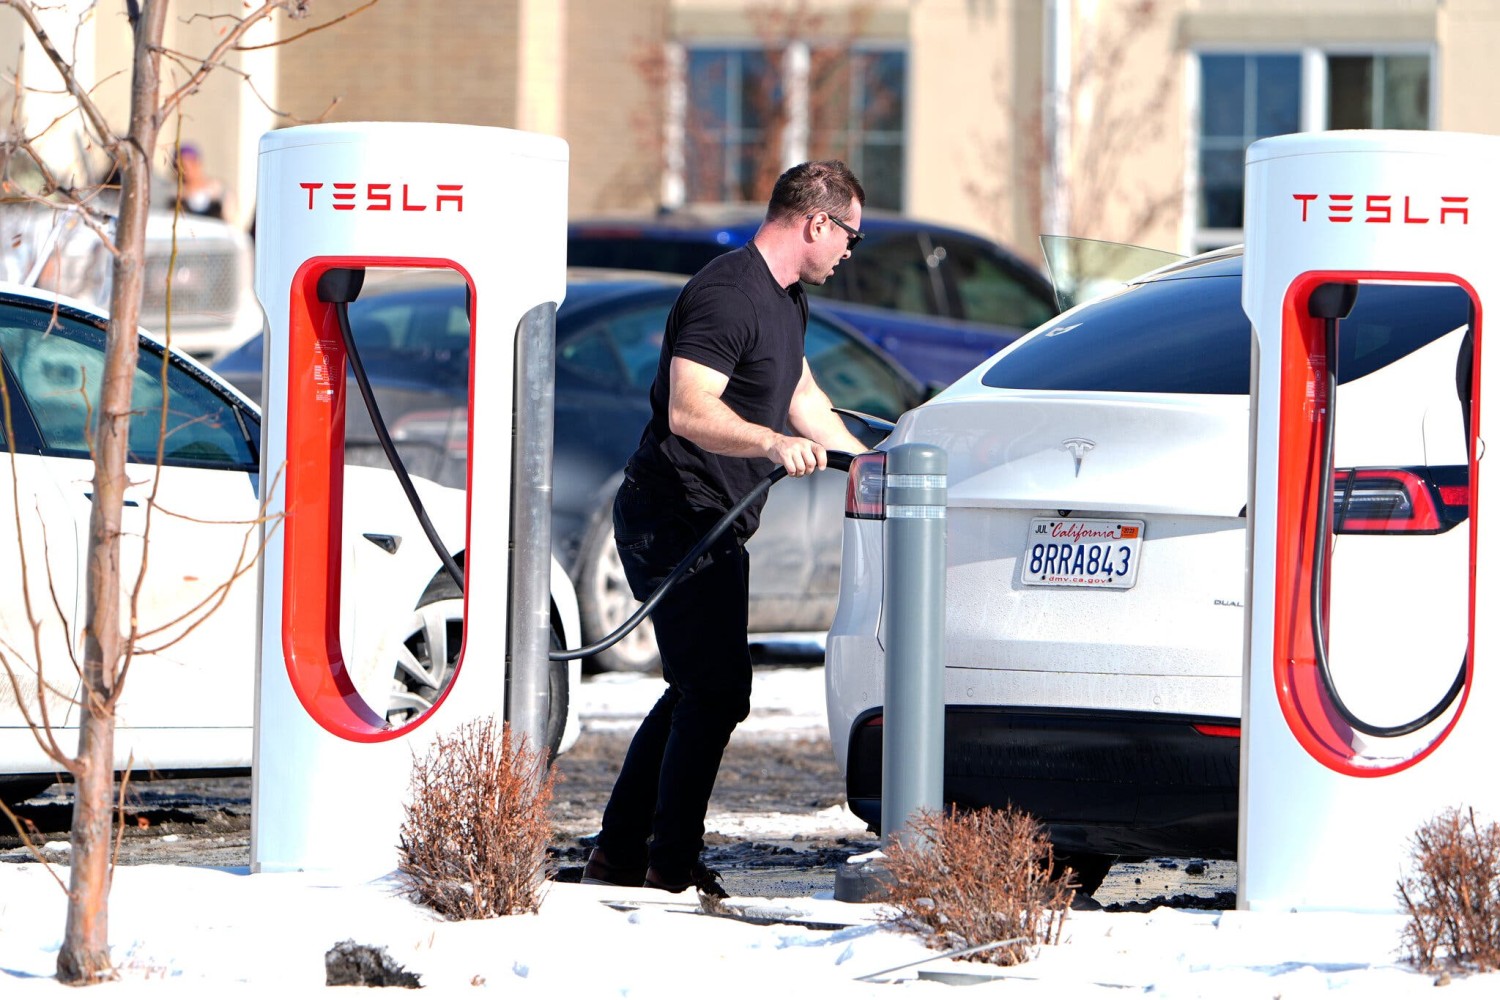 A driver charging his car in Denver on Tuesday. Tesla drivers across the United States have struggled with severely cold weather this week. Credit...David Zalubowski/Associated Press